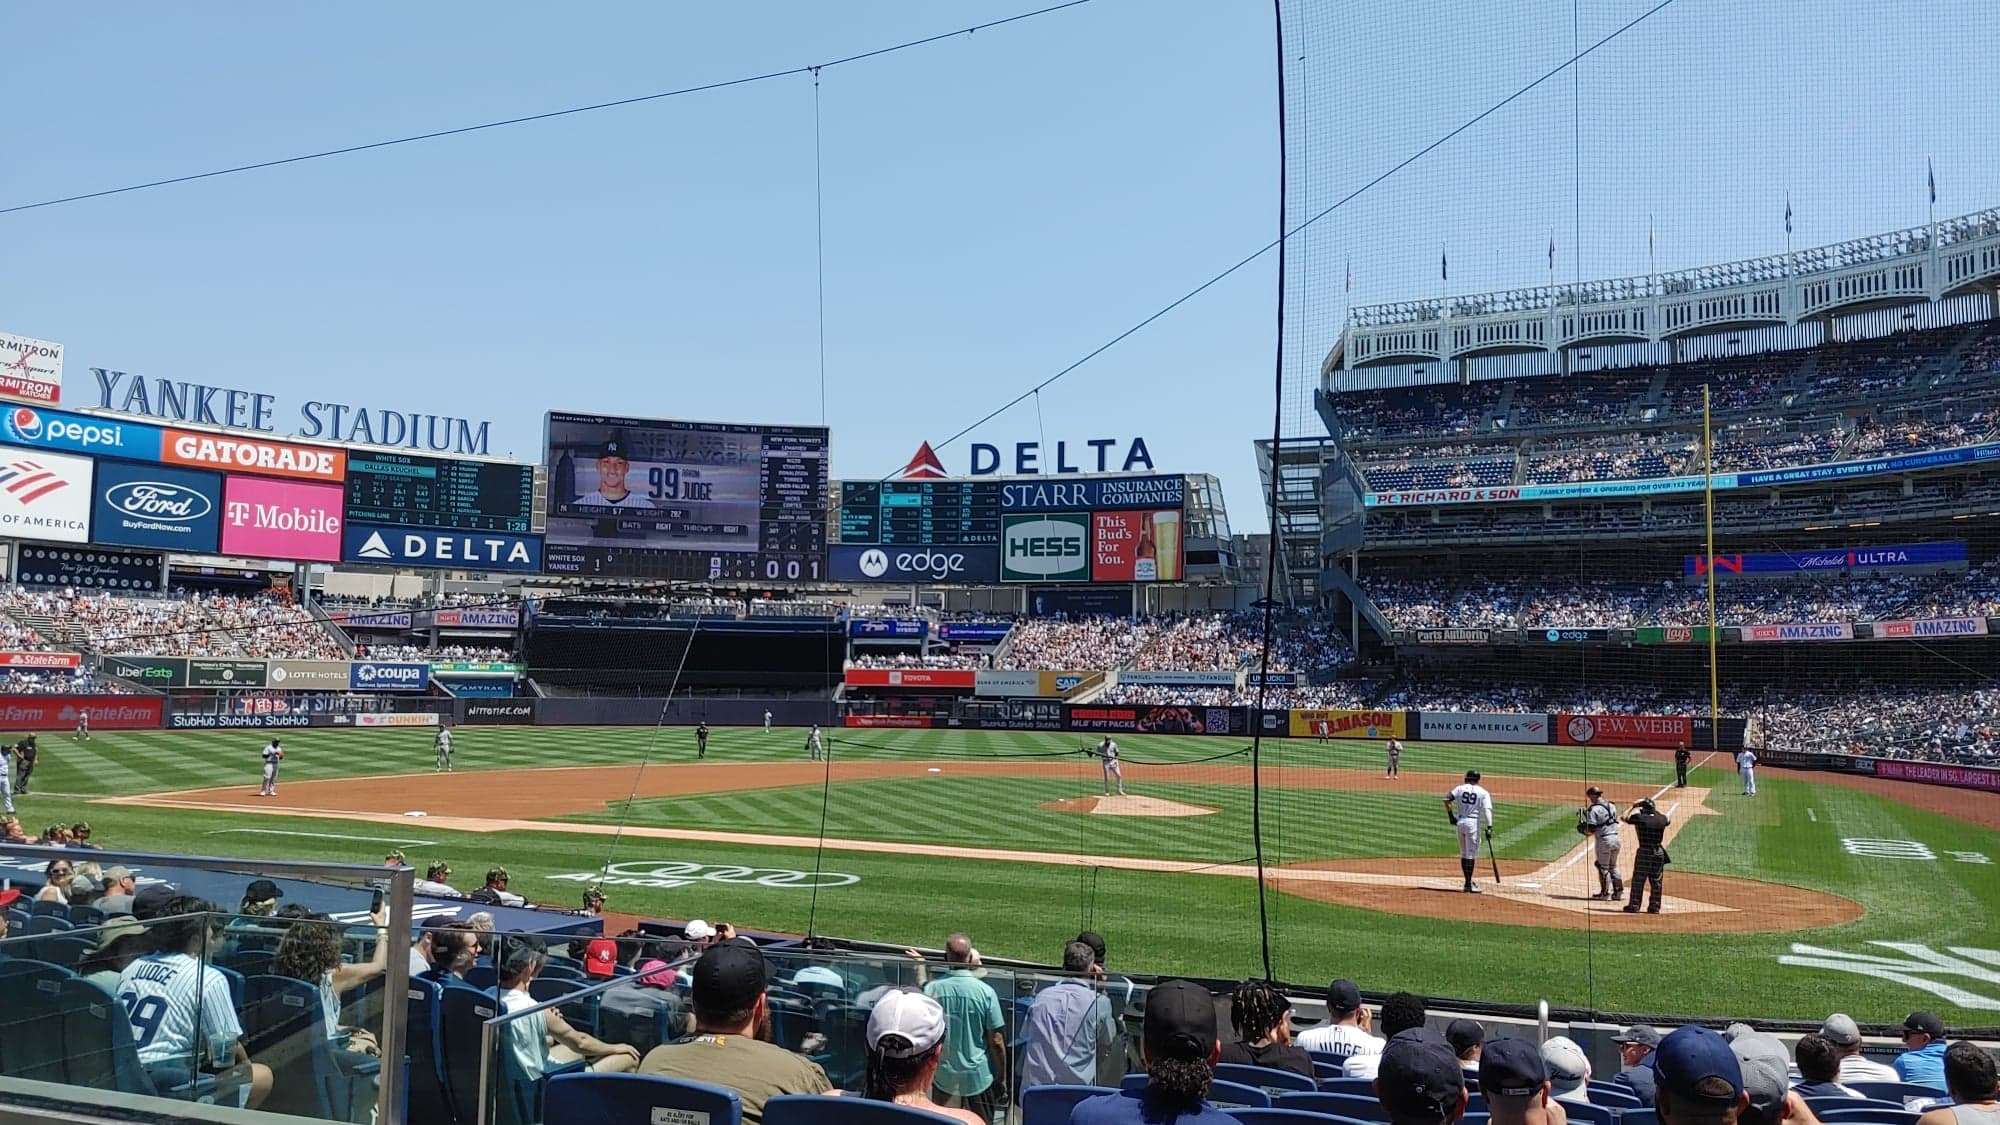 Awesome Capital One MLB seats: A quick review from Yankee Stadium